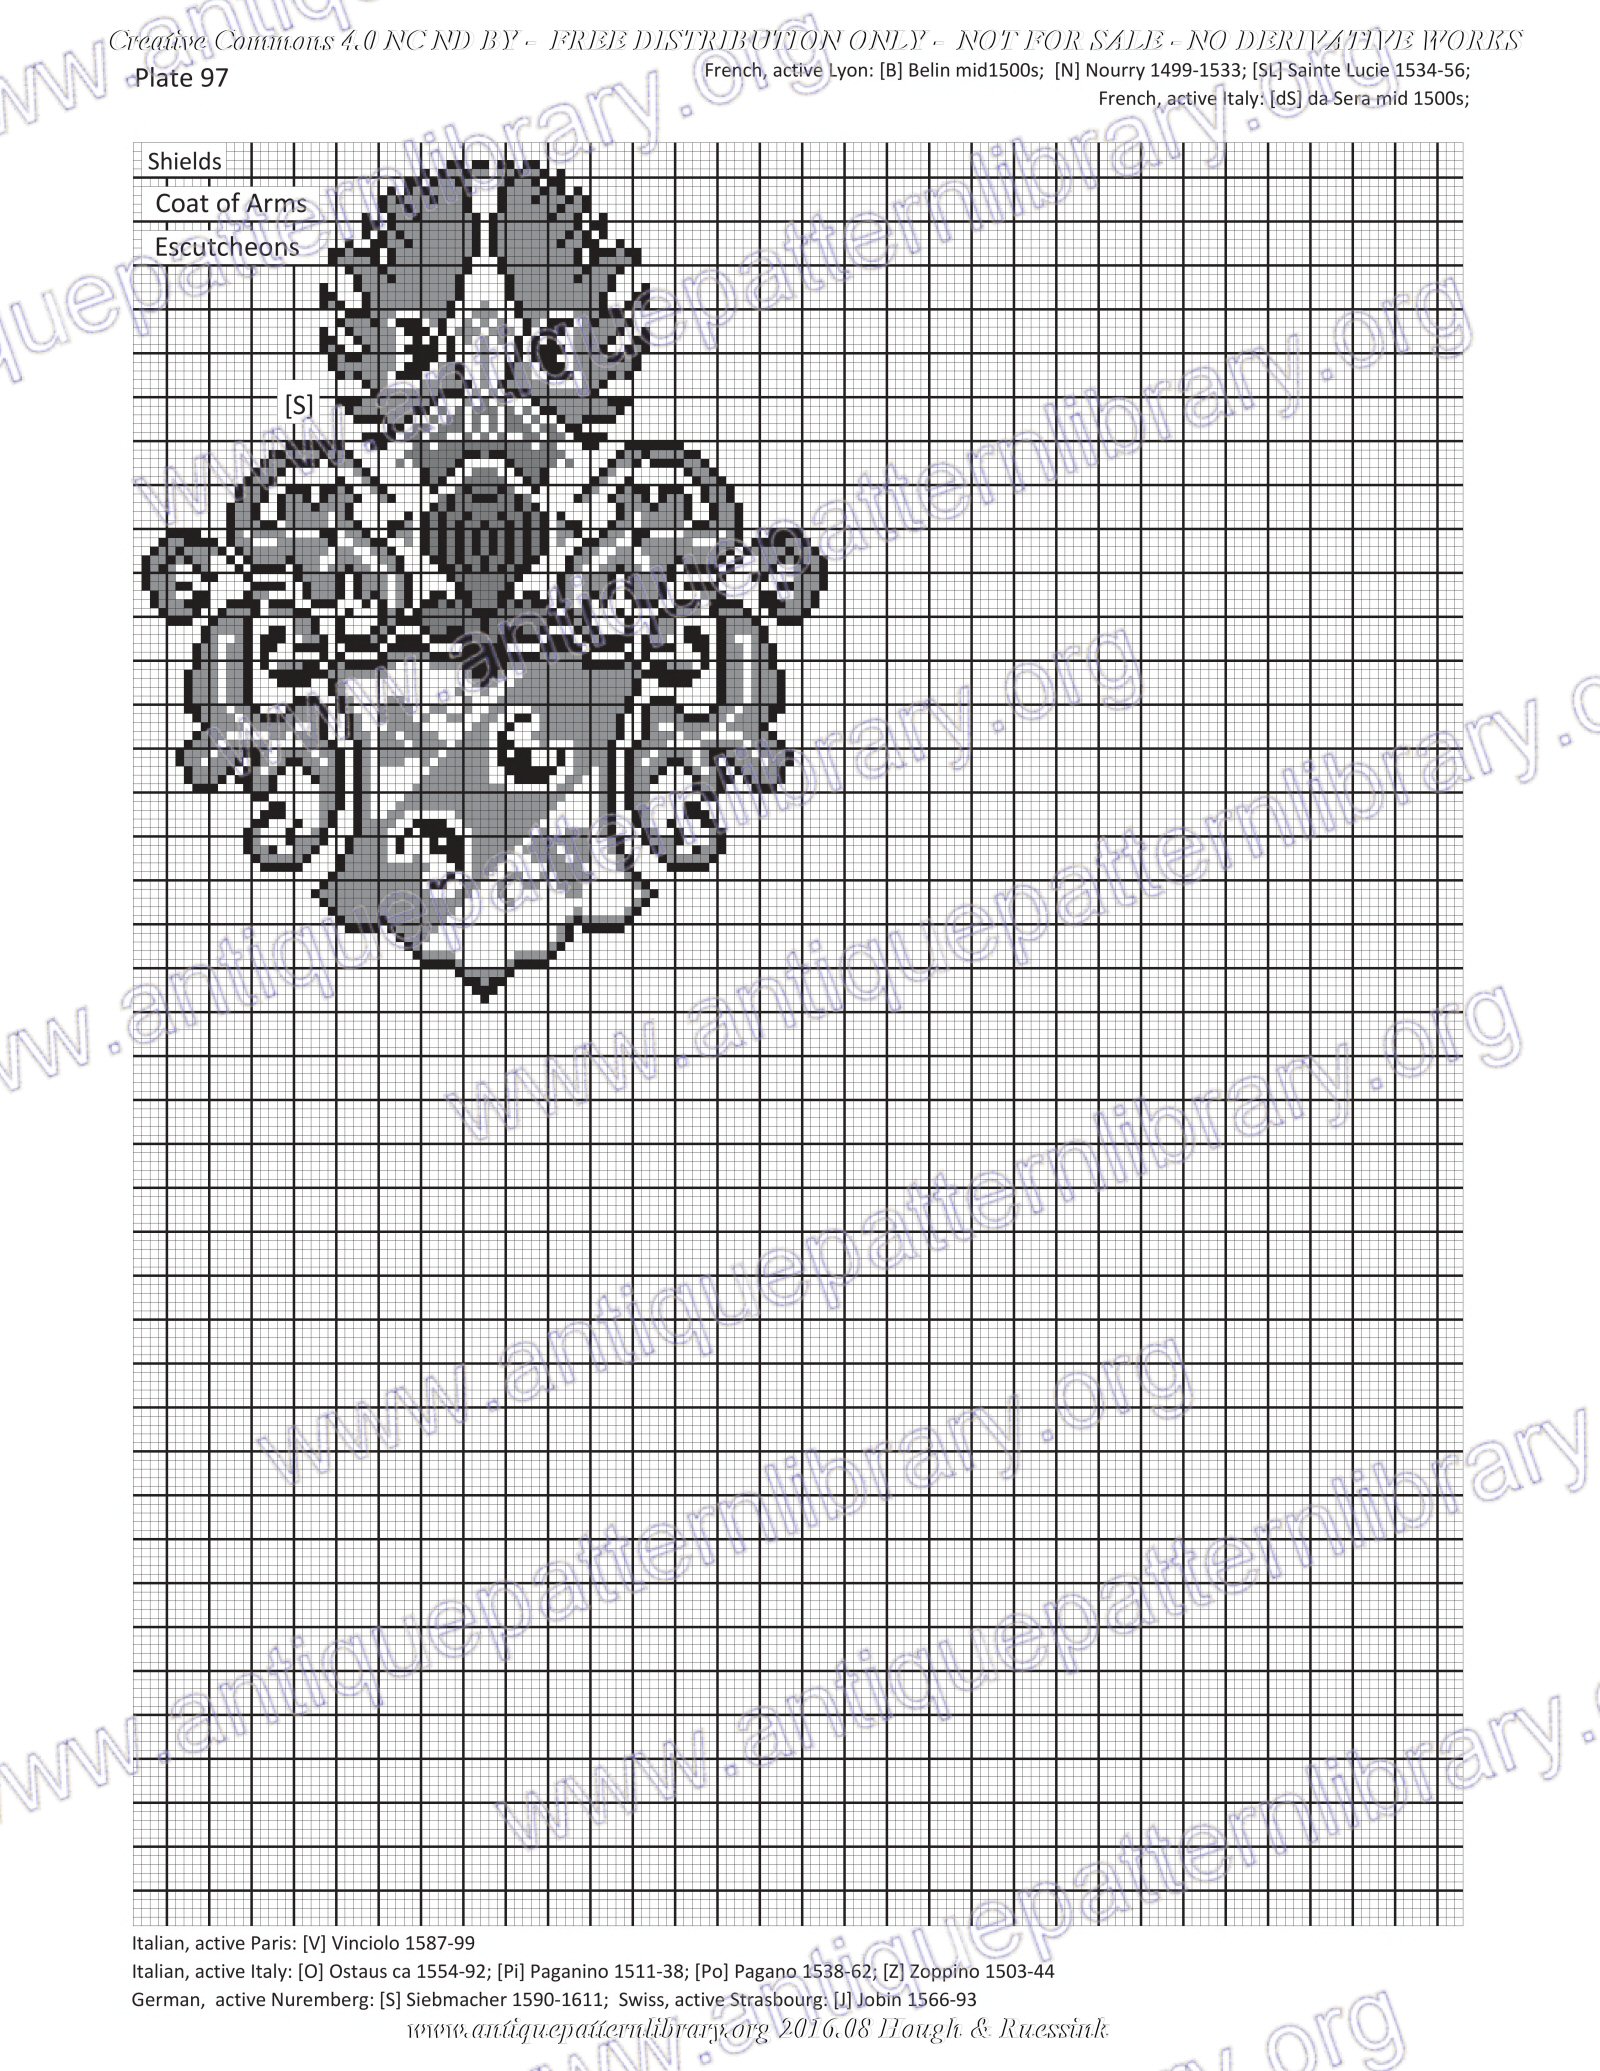 G-HH001 Design Elements of Renaissance Embroidery
No derivative use allowed